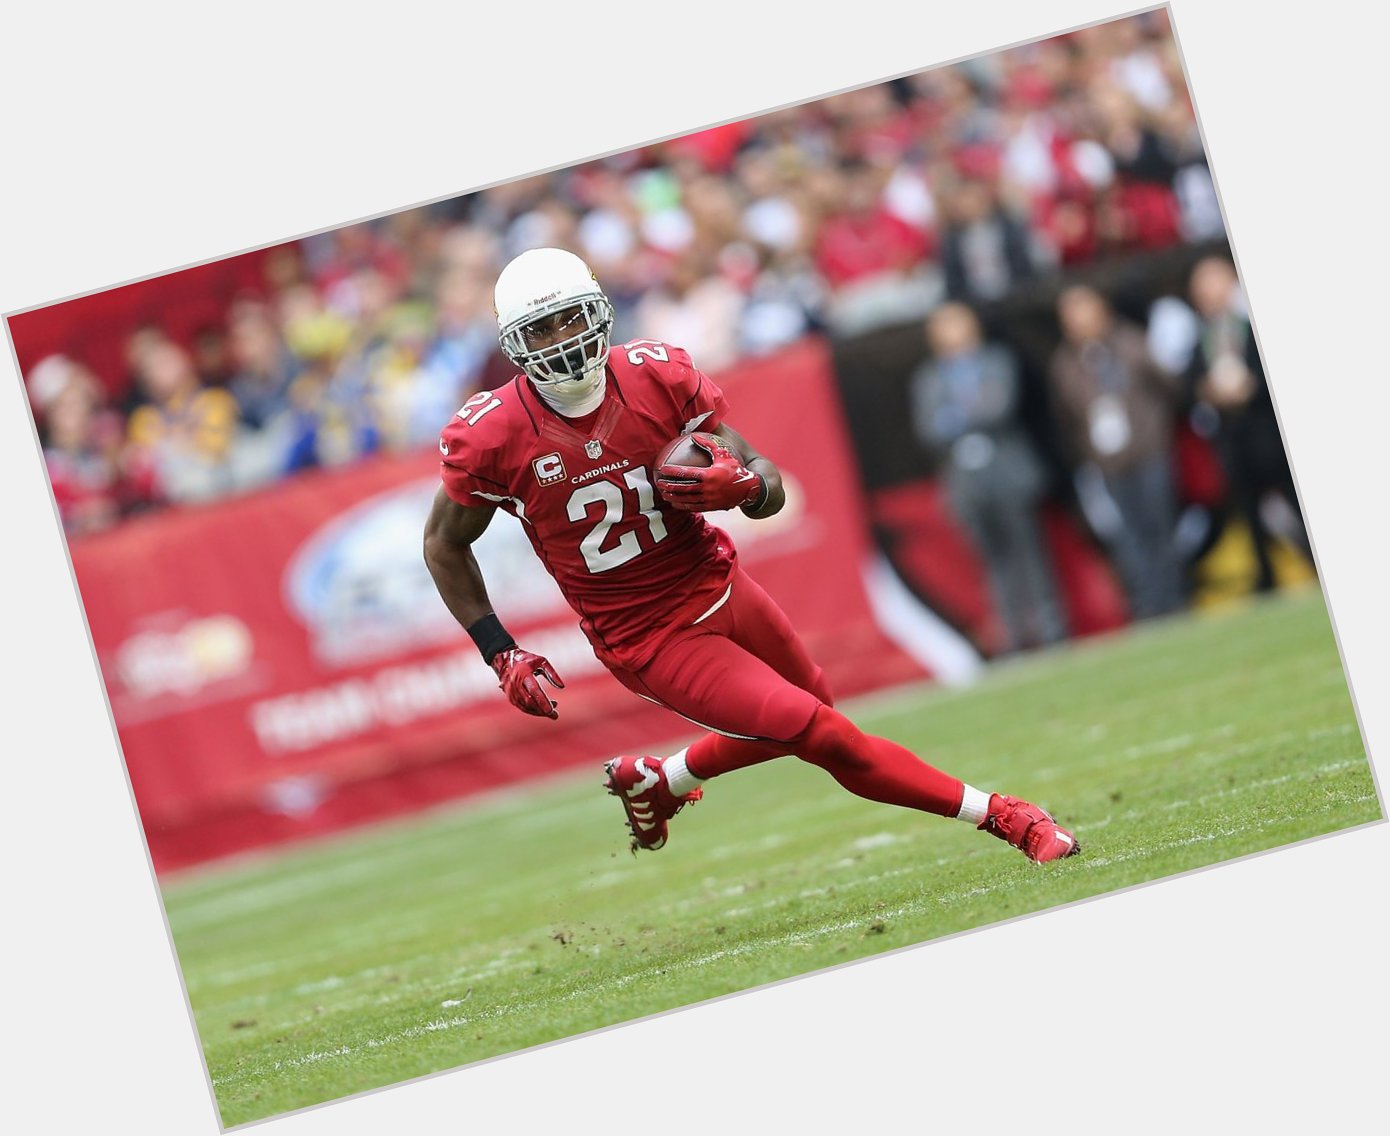 Happy Birthday to Patrick Peterson who turns 27 today! 